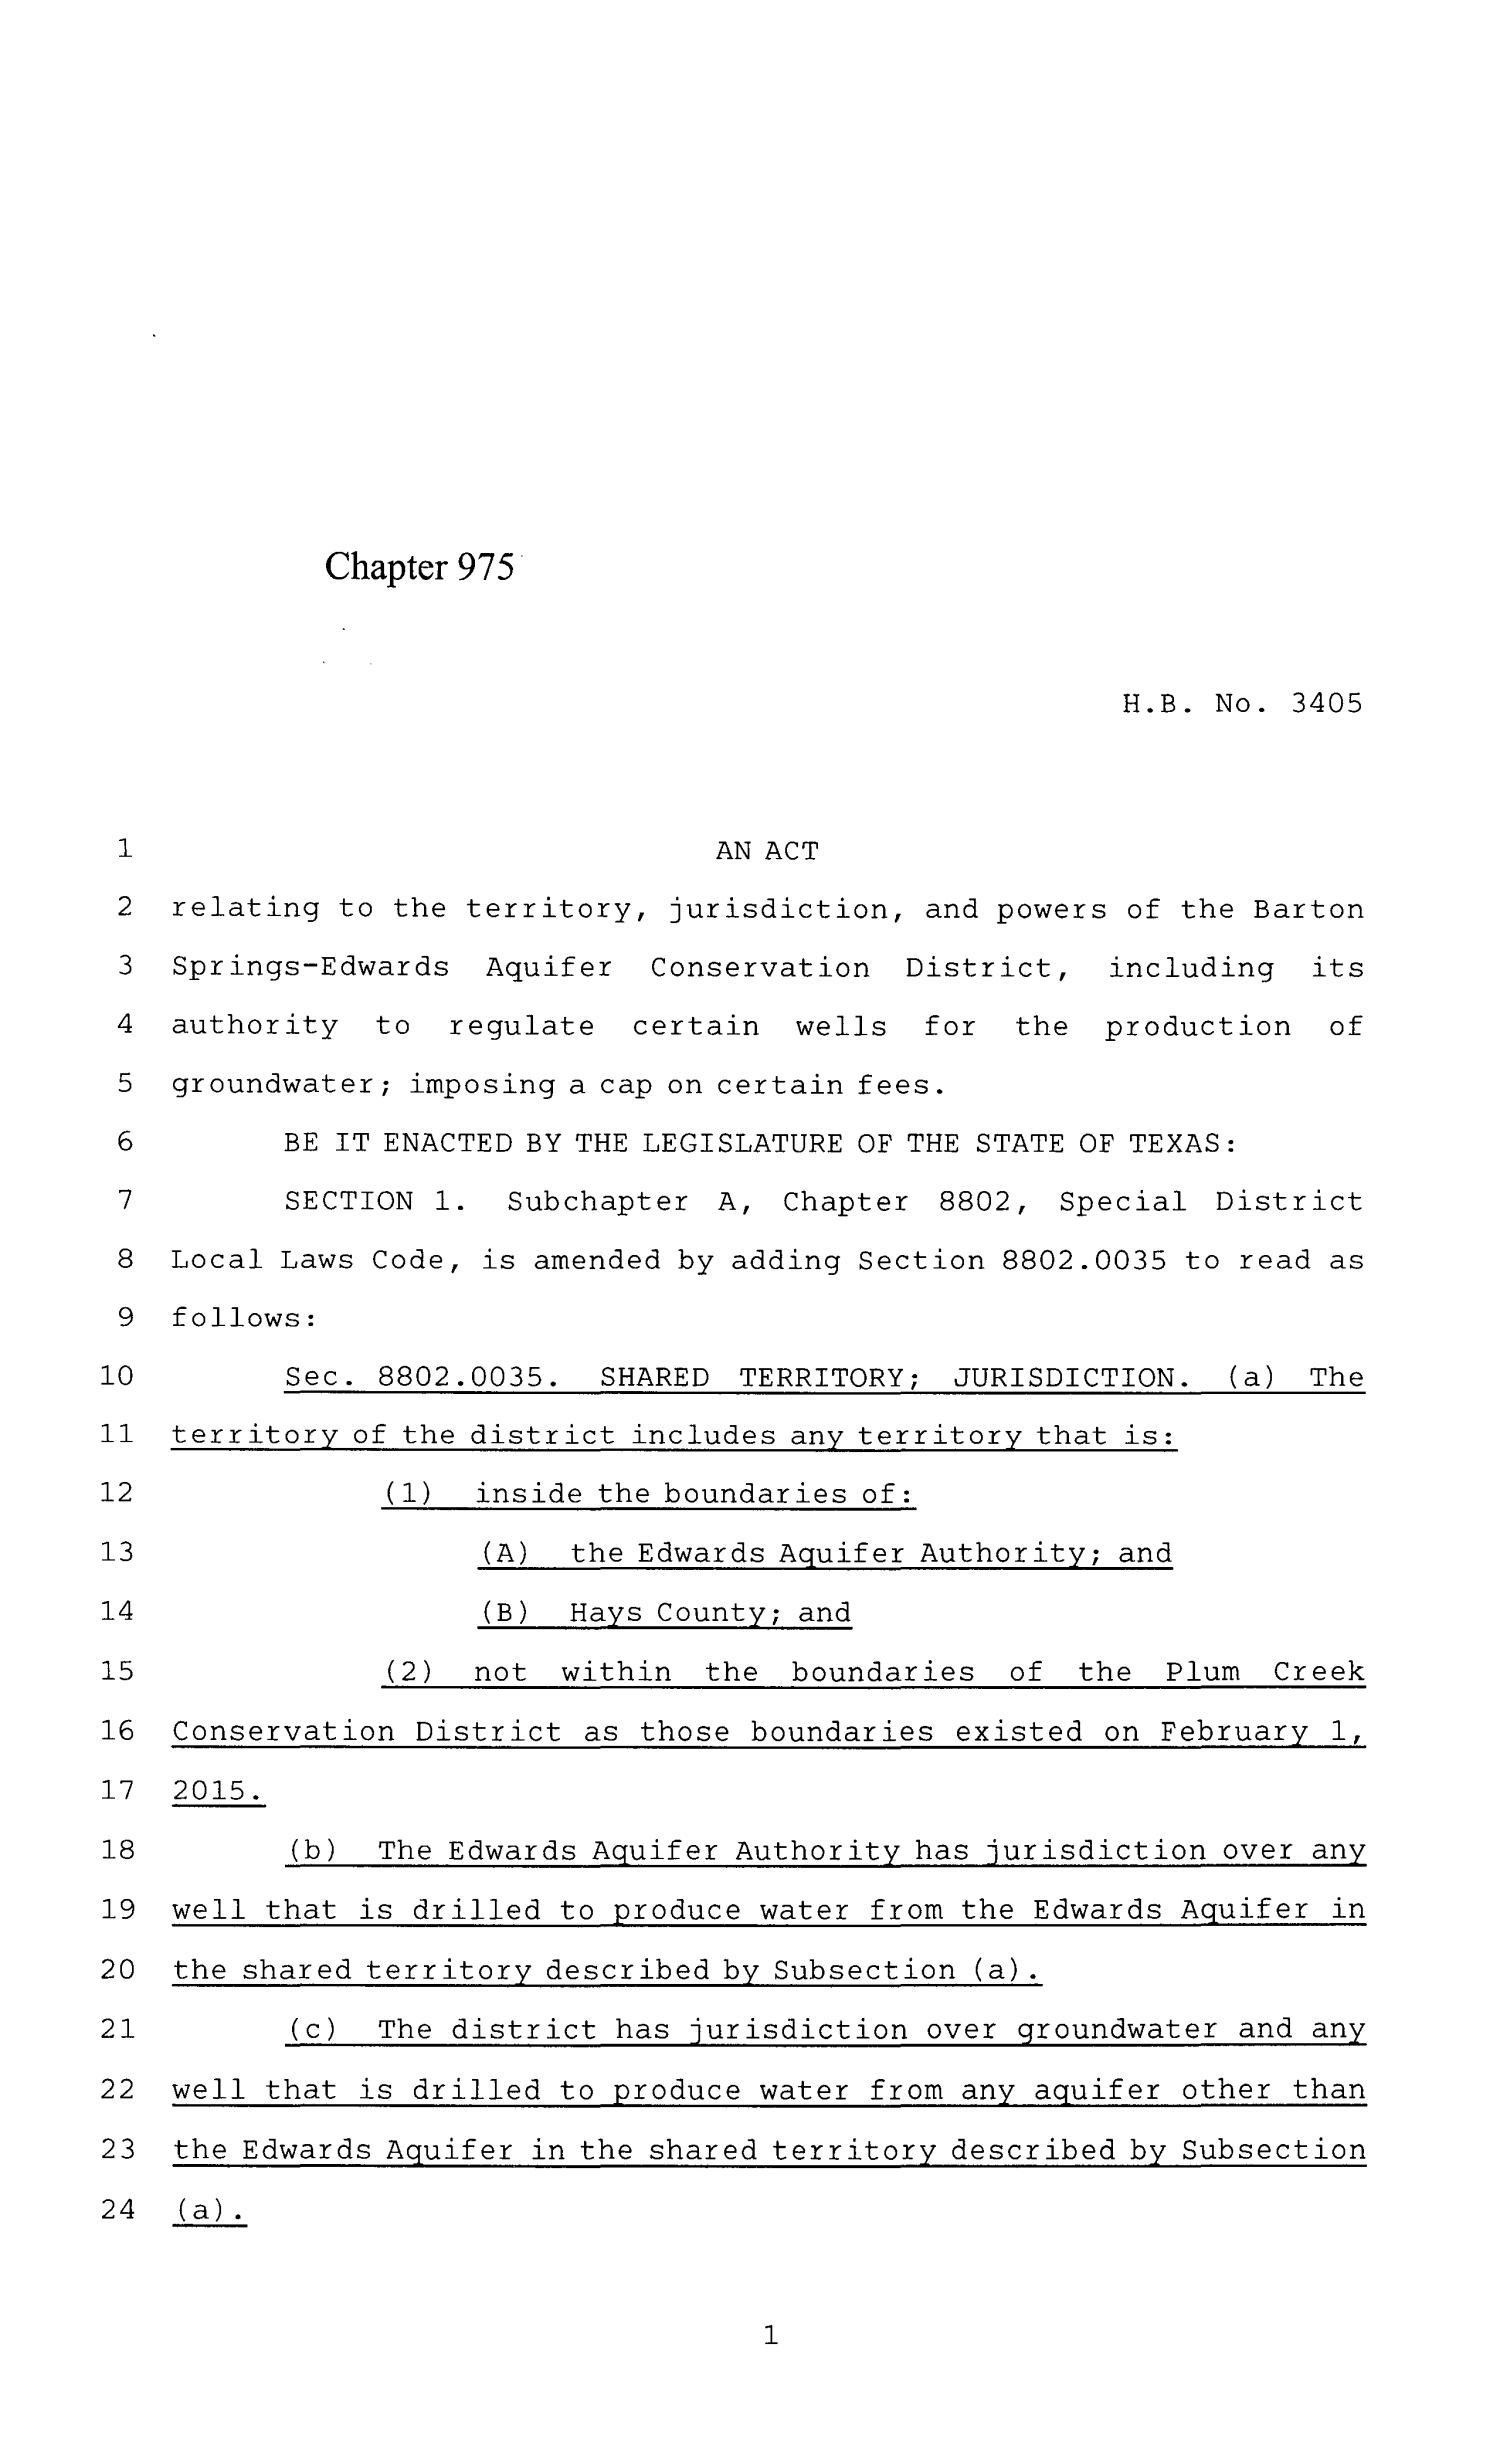 84th Texas Legislature, Regular Session, House Bill 3405, Chapter 975
                                                
                                                    [Sequence #]: 1 of 18
                                                